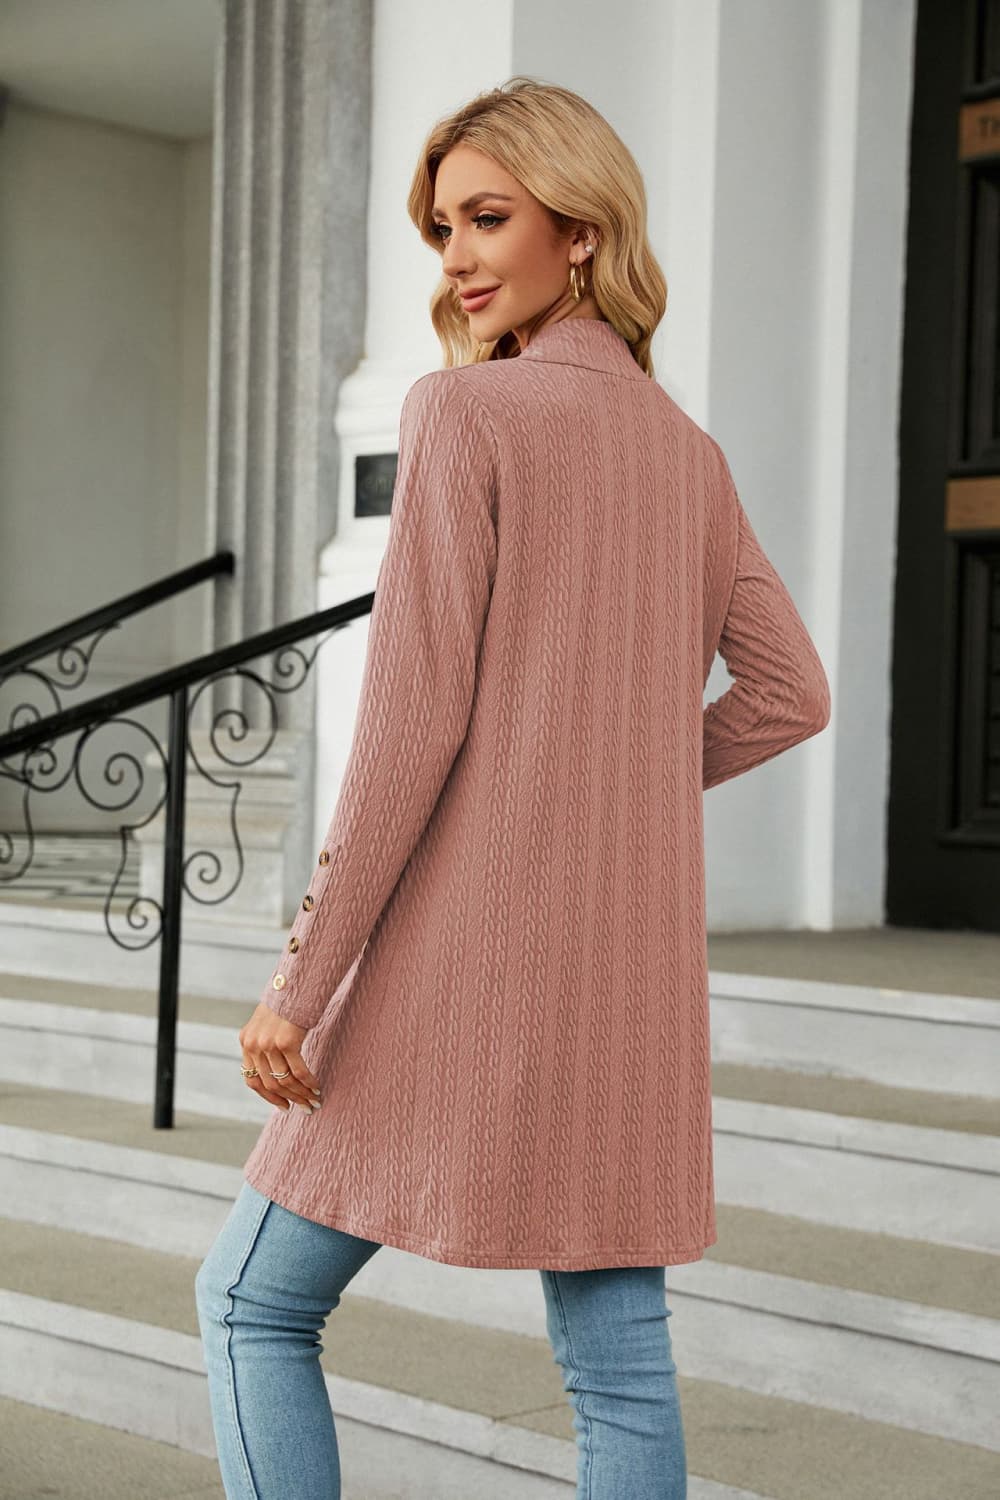 Long Sleeve Open Front Cardigan - Women’s Clothing & Accessories - Shirts & Tops - 9 - 2024